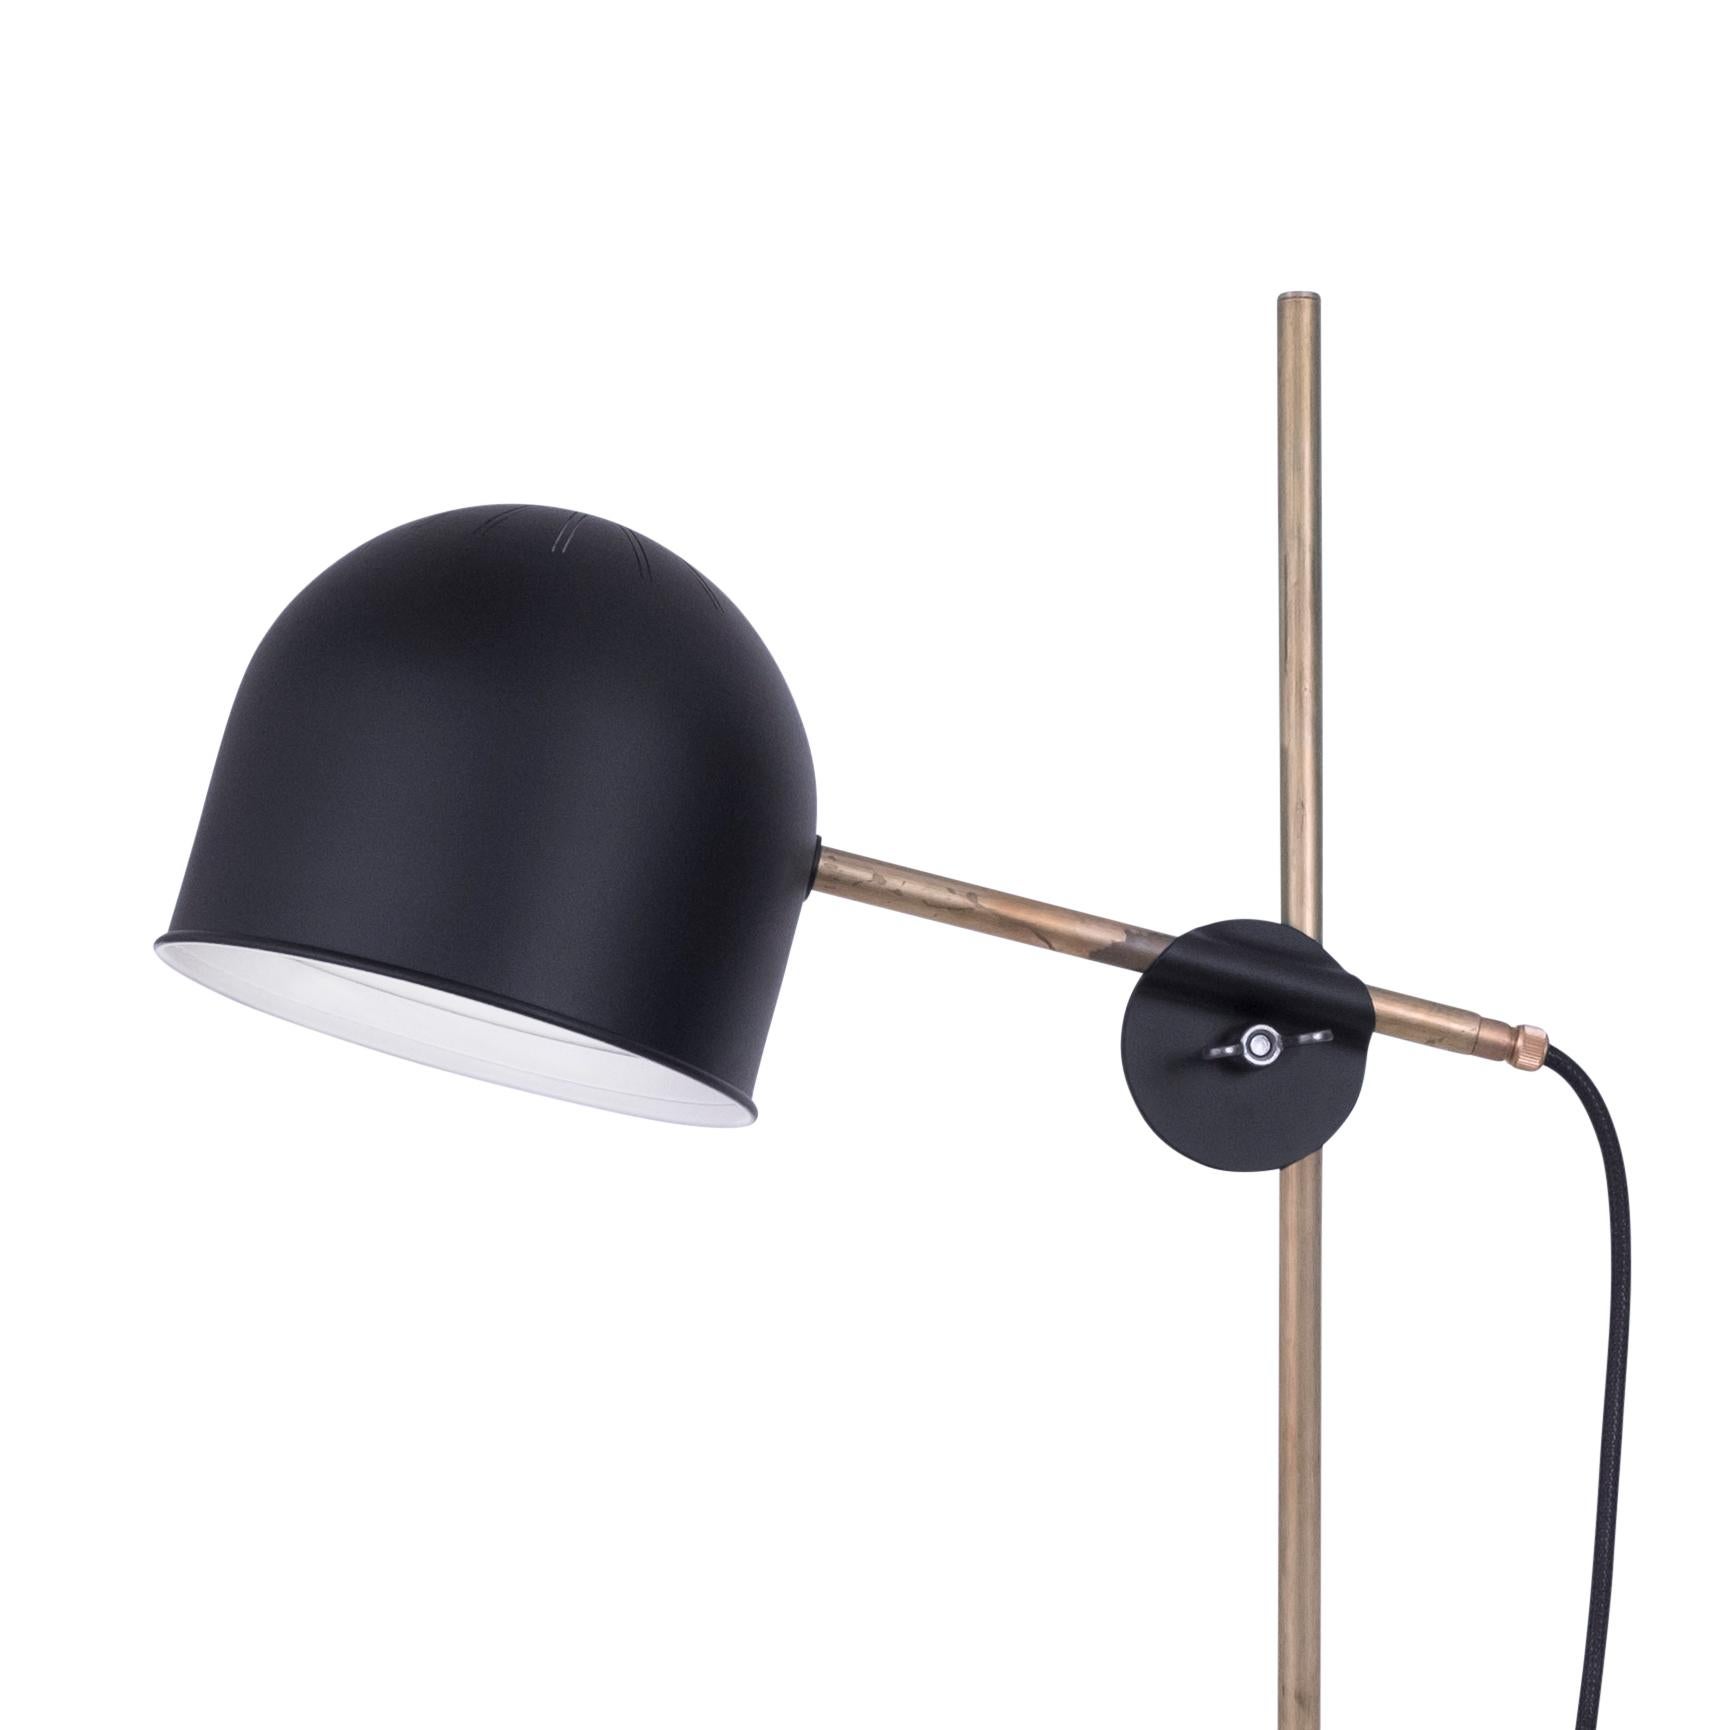 Table lamp manufactured by Konsthantverk

KH#2 table
Measures: Br 400 mm
H 580 mm
Max 40 W E27
1002-8 black/raw brass

This lamp is wired for Europe, if used in US or any other country the client will need to convert it.

The lamps are wiring with